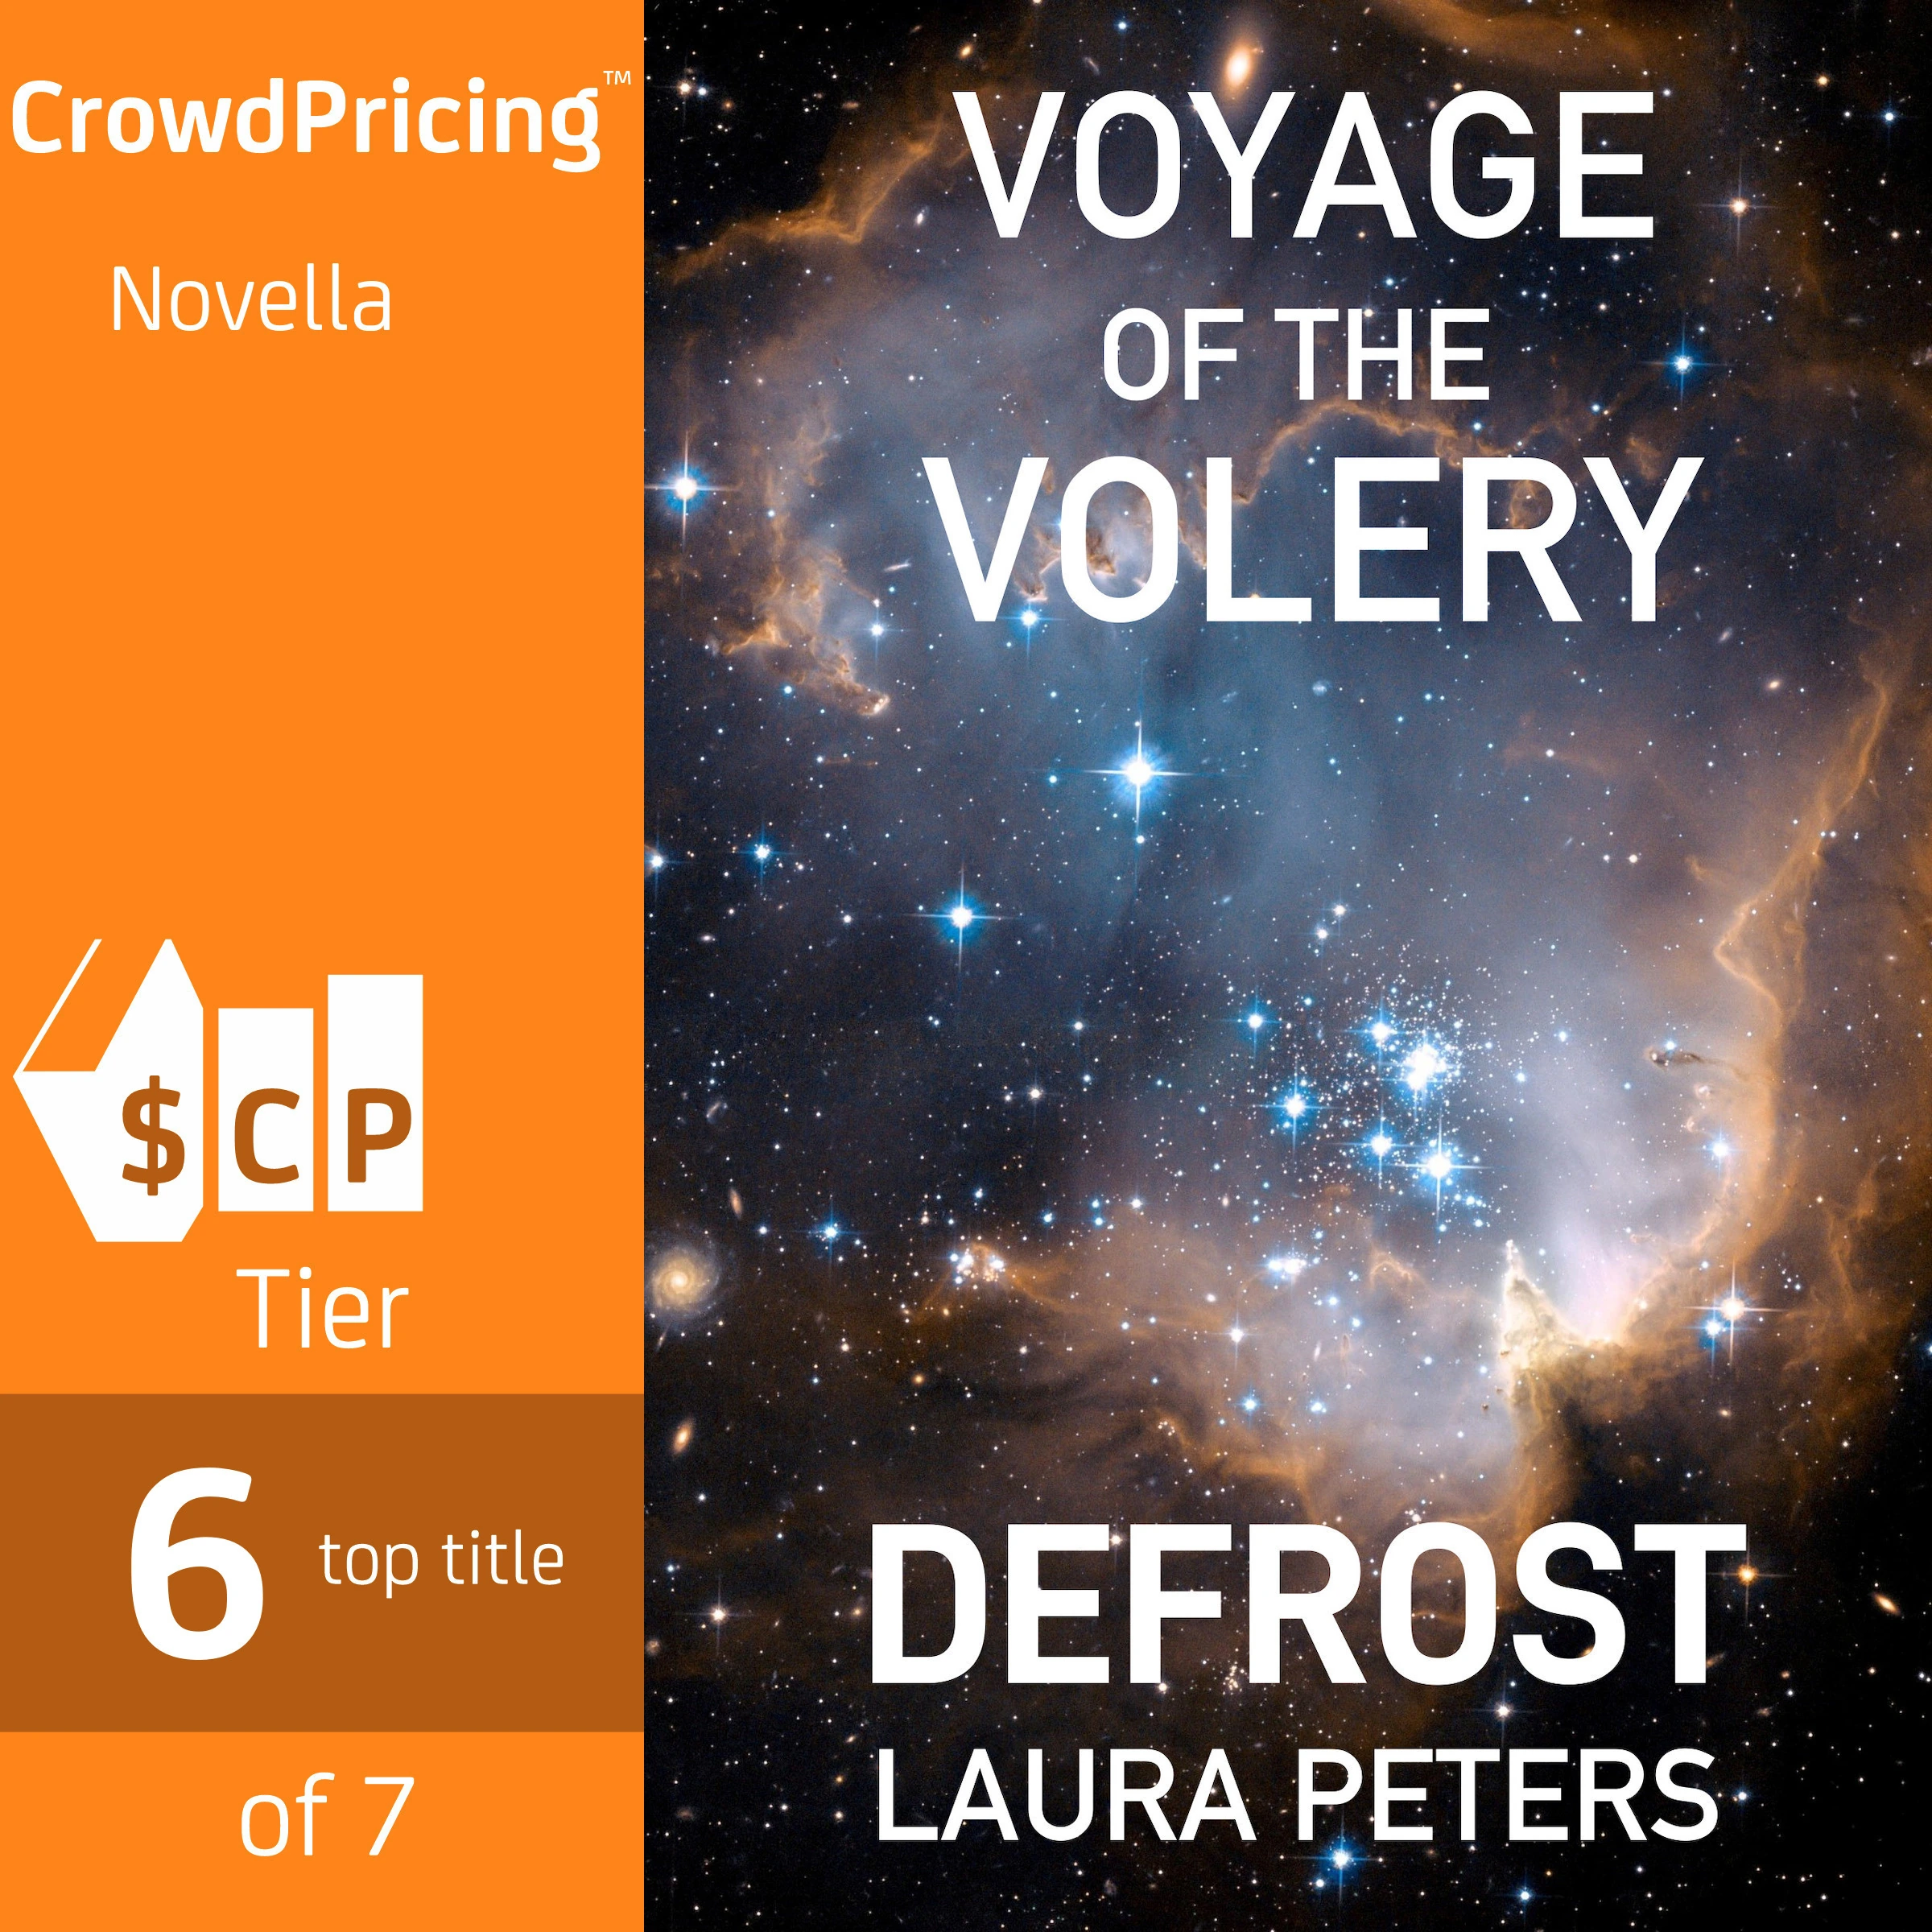 Voyage of the Volery: Defrost by Laura Peters Audiobook